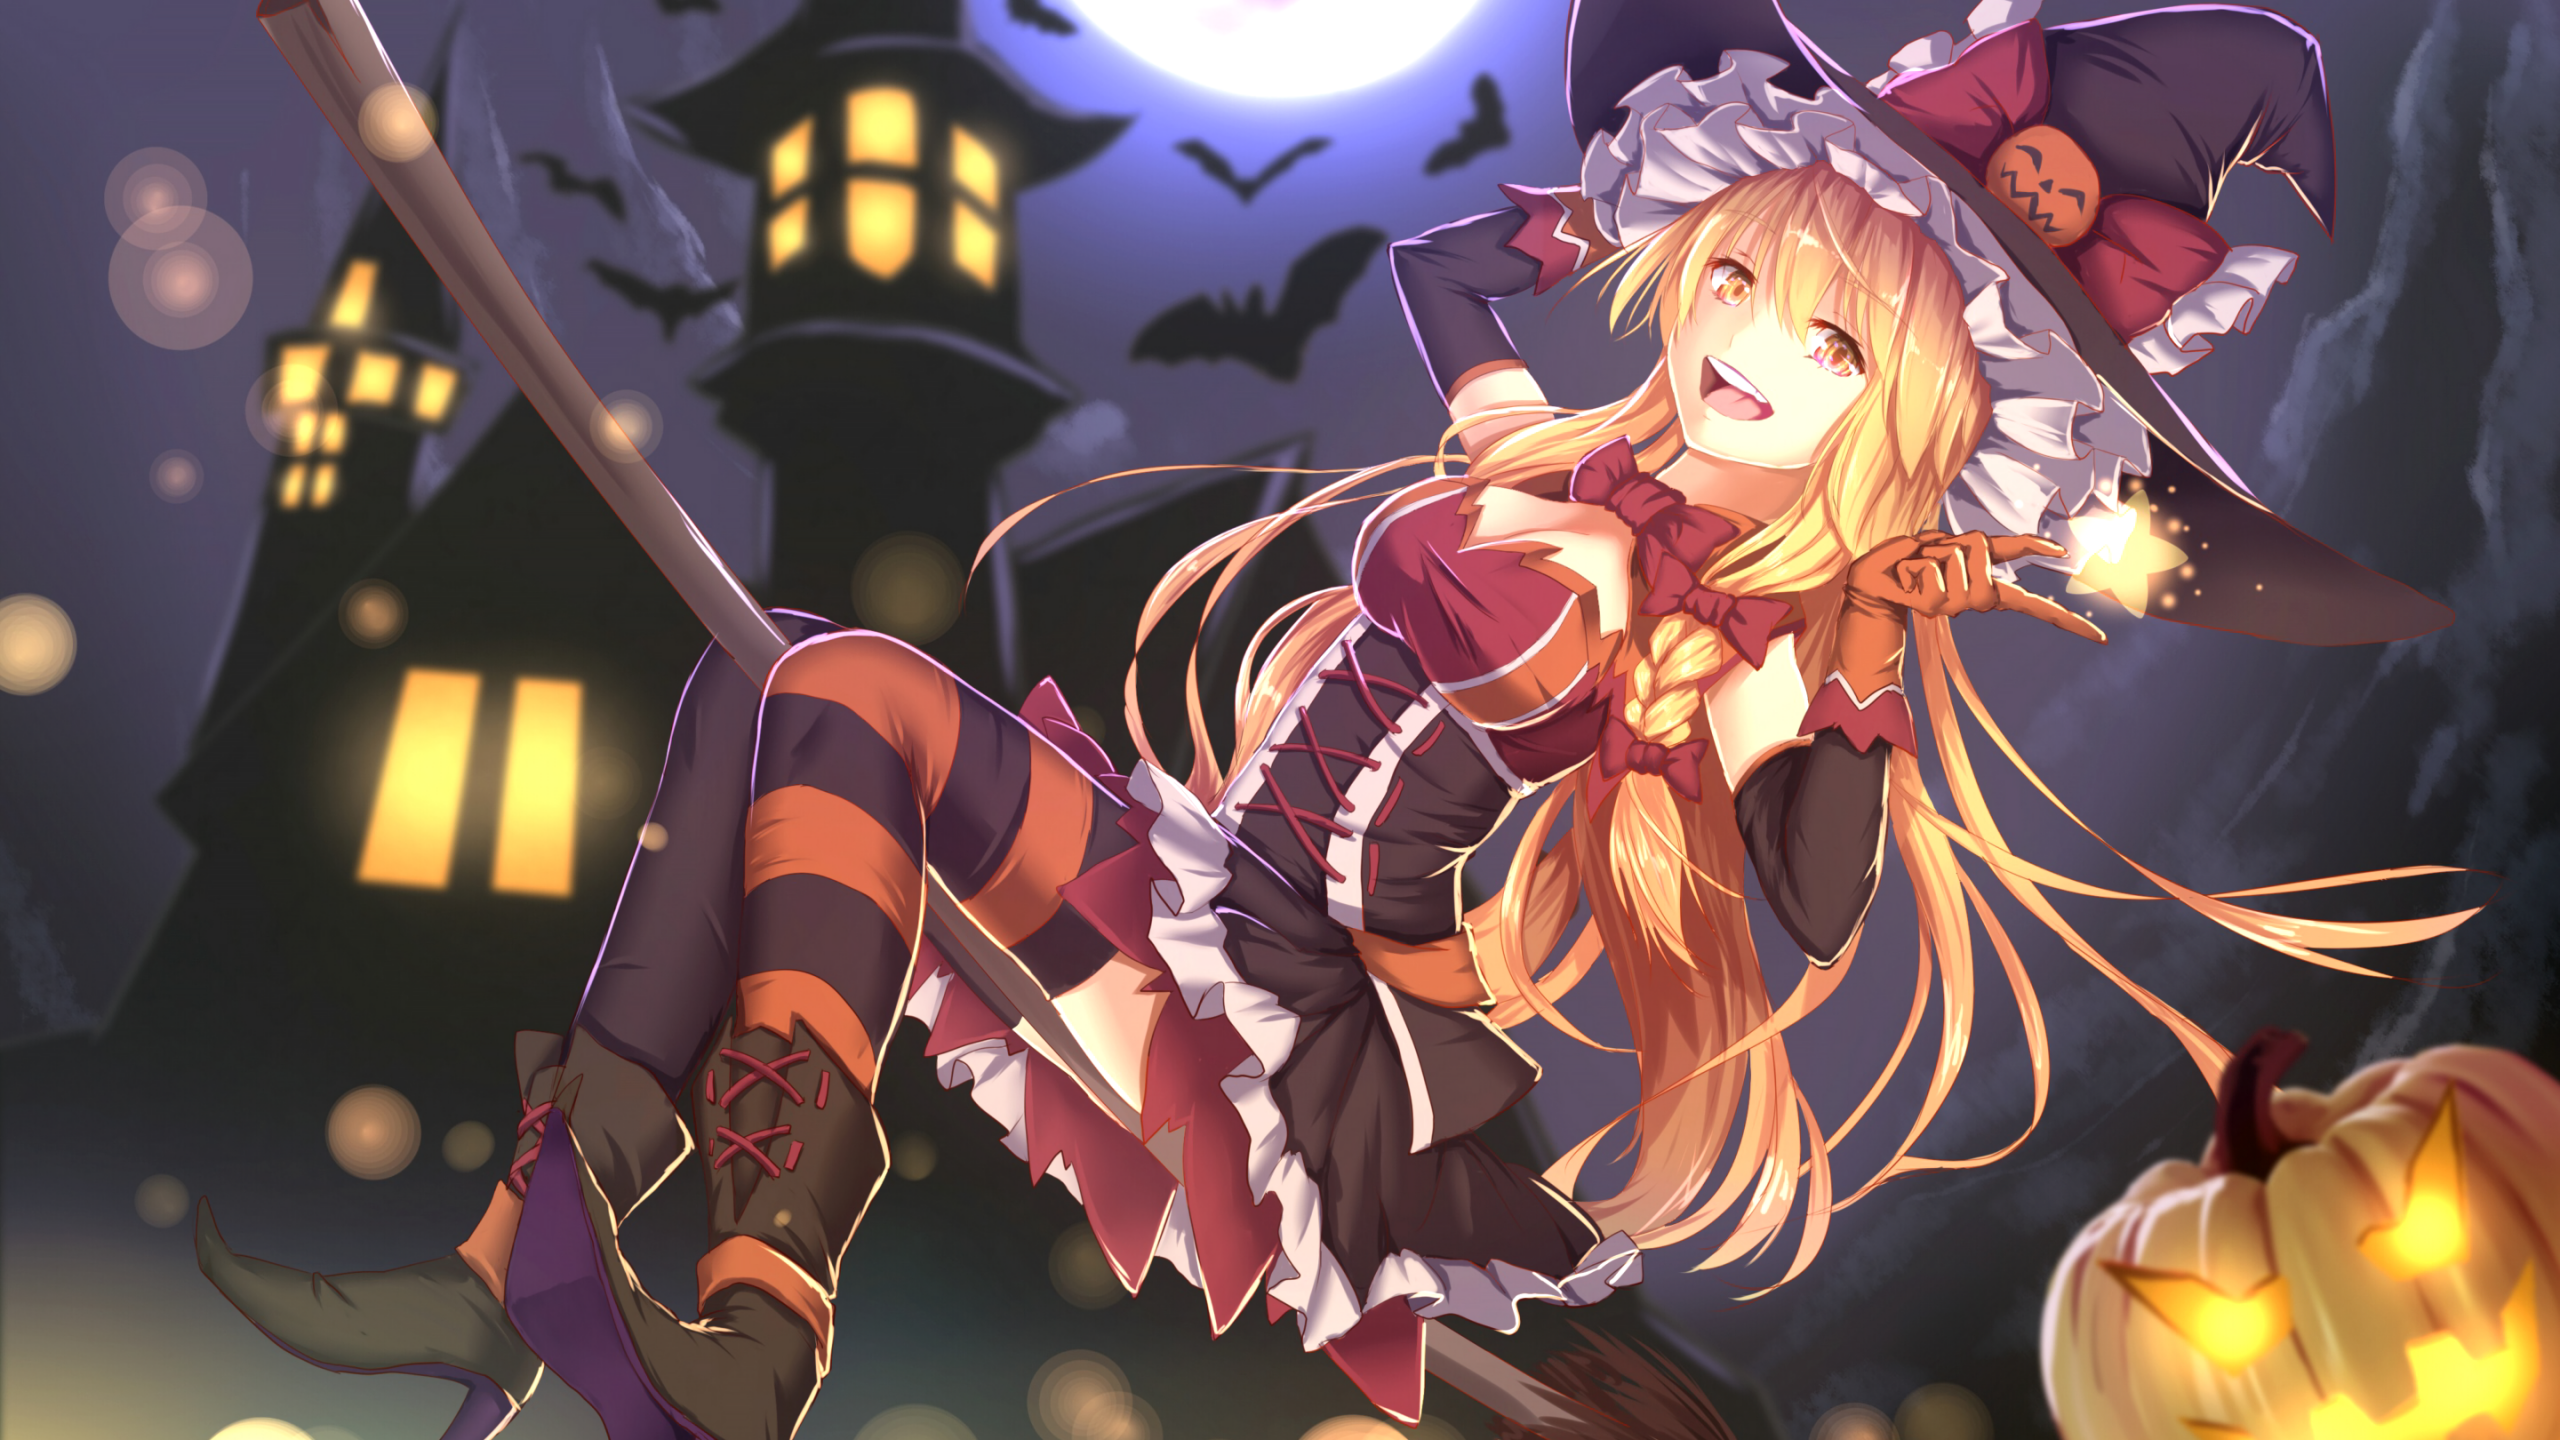 Download 2560x1440 Anime Girl, Halloween Costume, Witch, Broom, Dress, Smiling, Blonde Wallpaper for iMac 27 inch